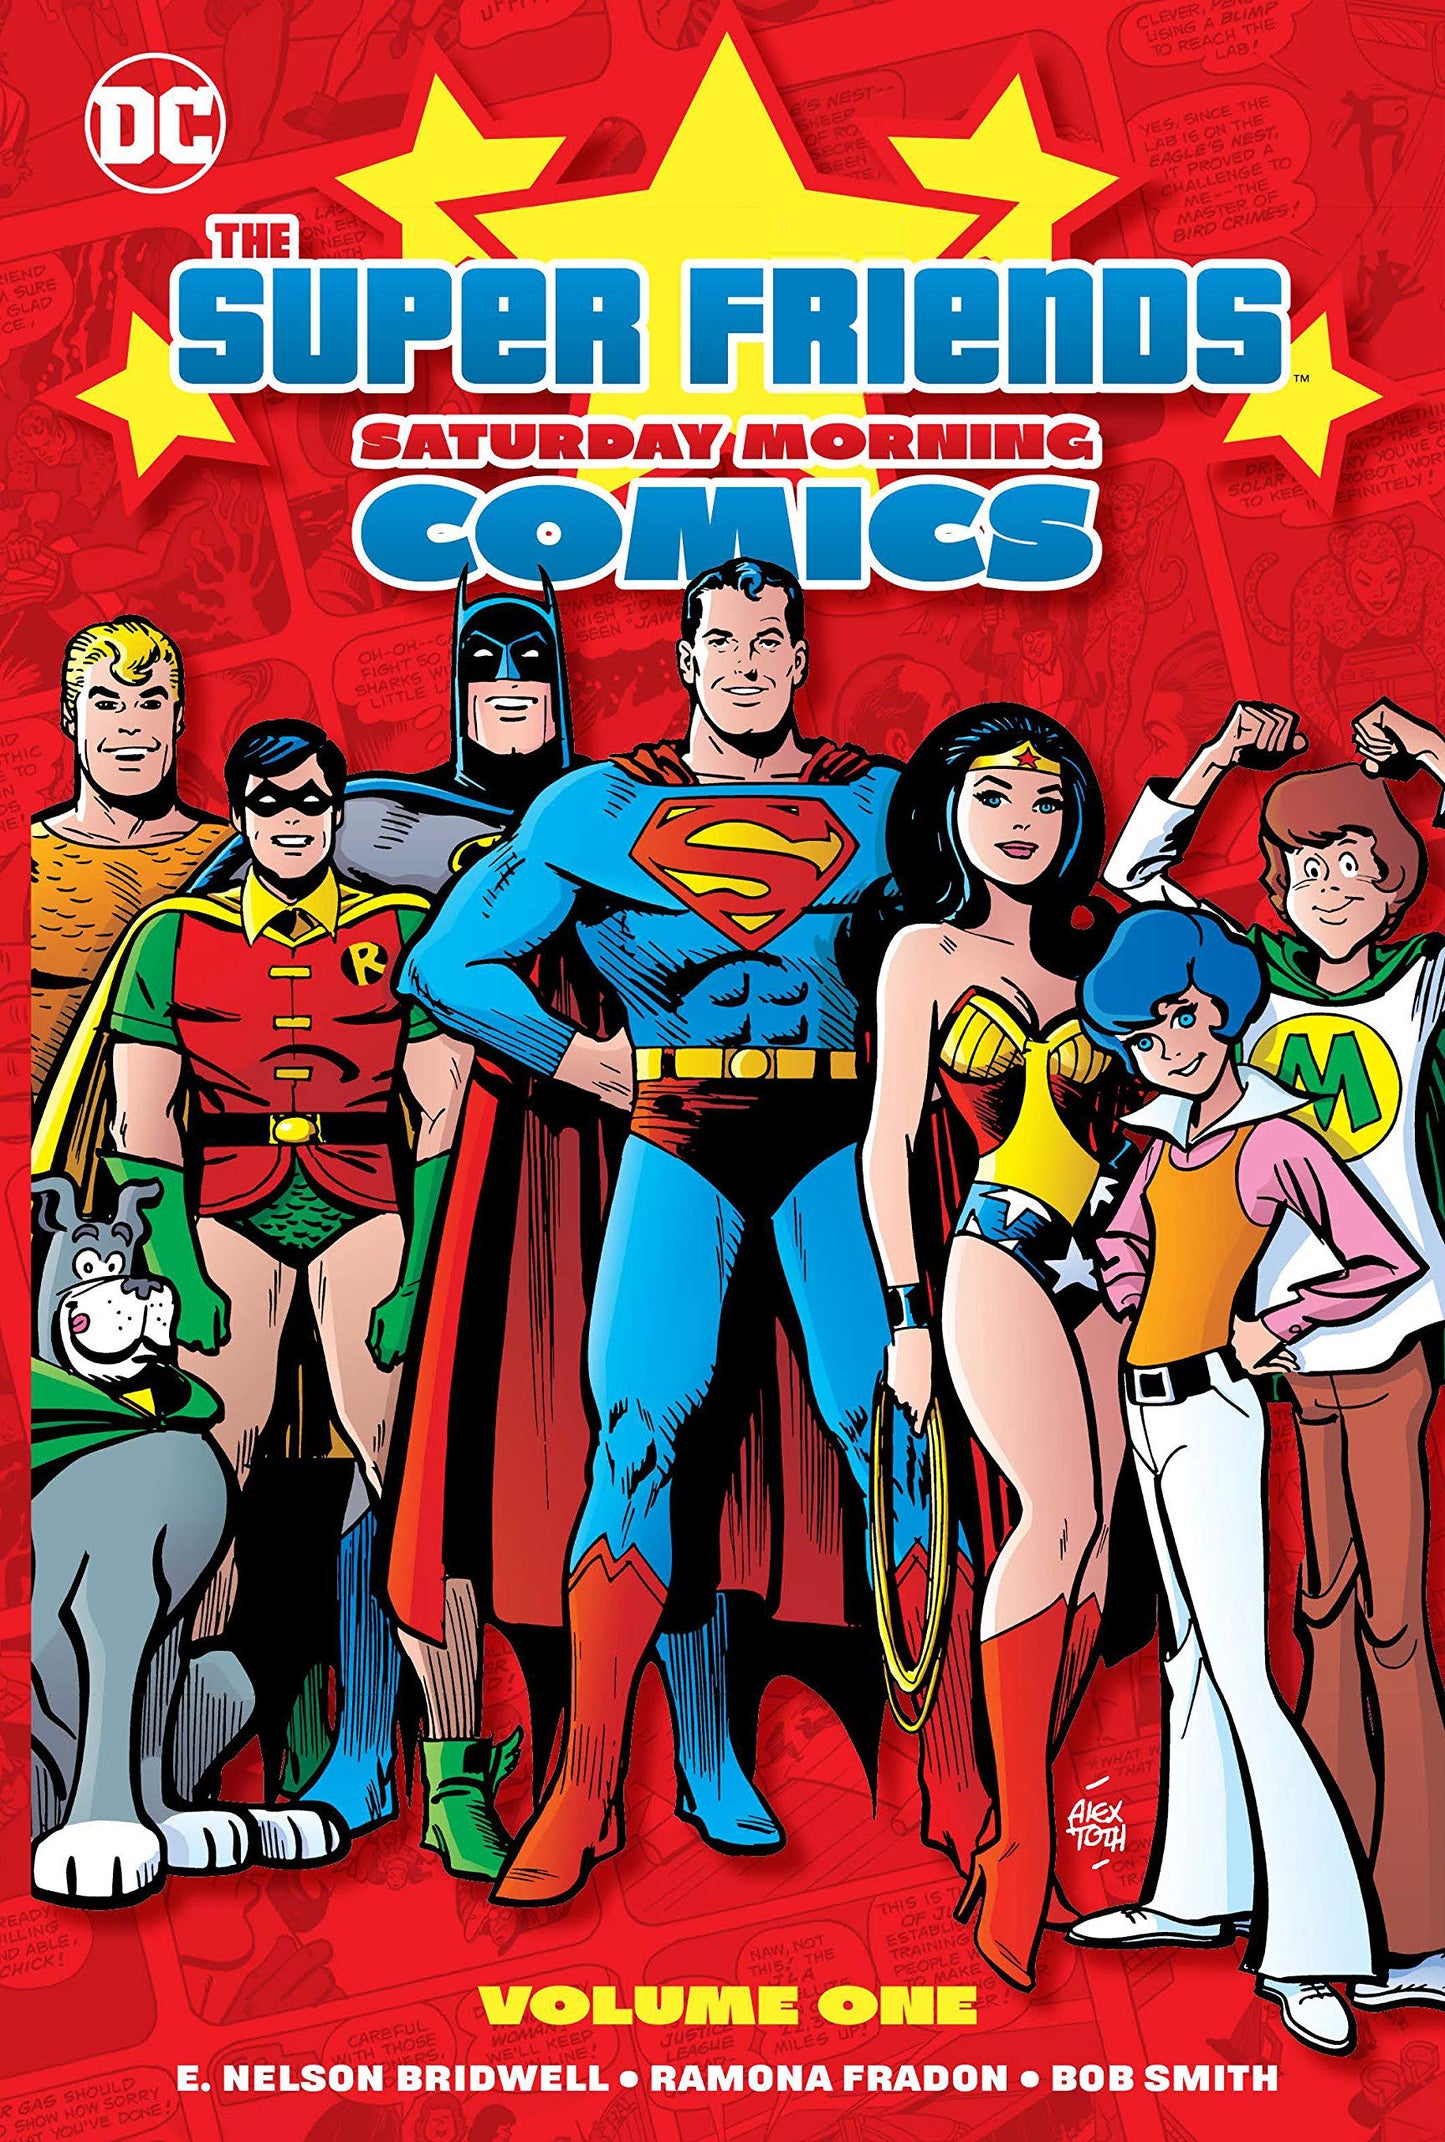 Super Friends: Saturday Morning Comics Vol. 1 Hardcover - Graphic Novel - The Hooded Goblin